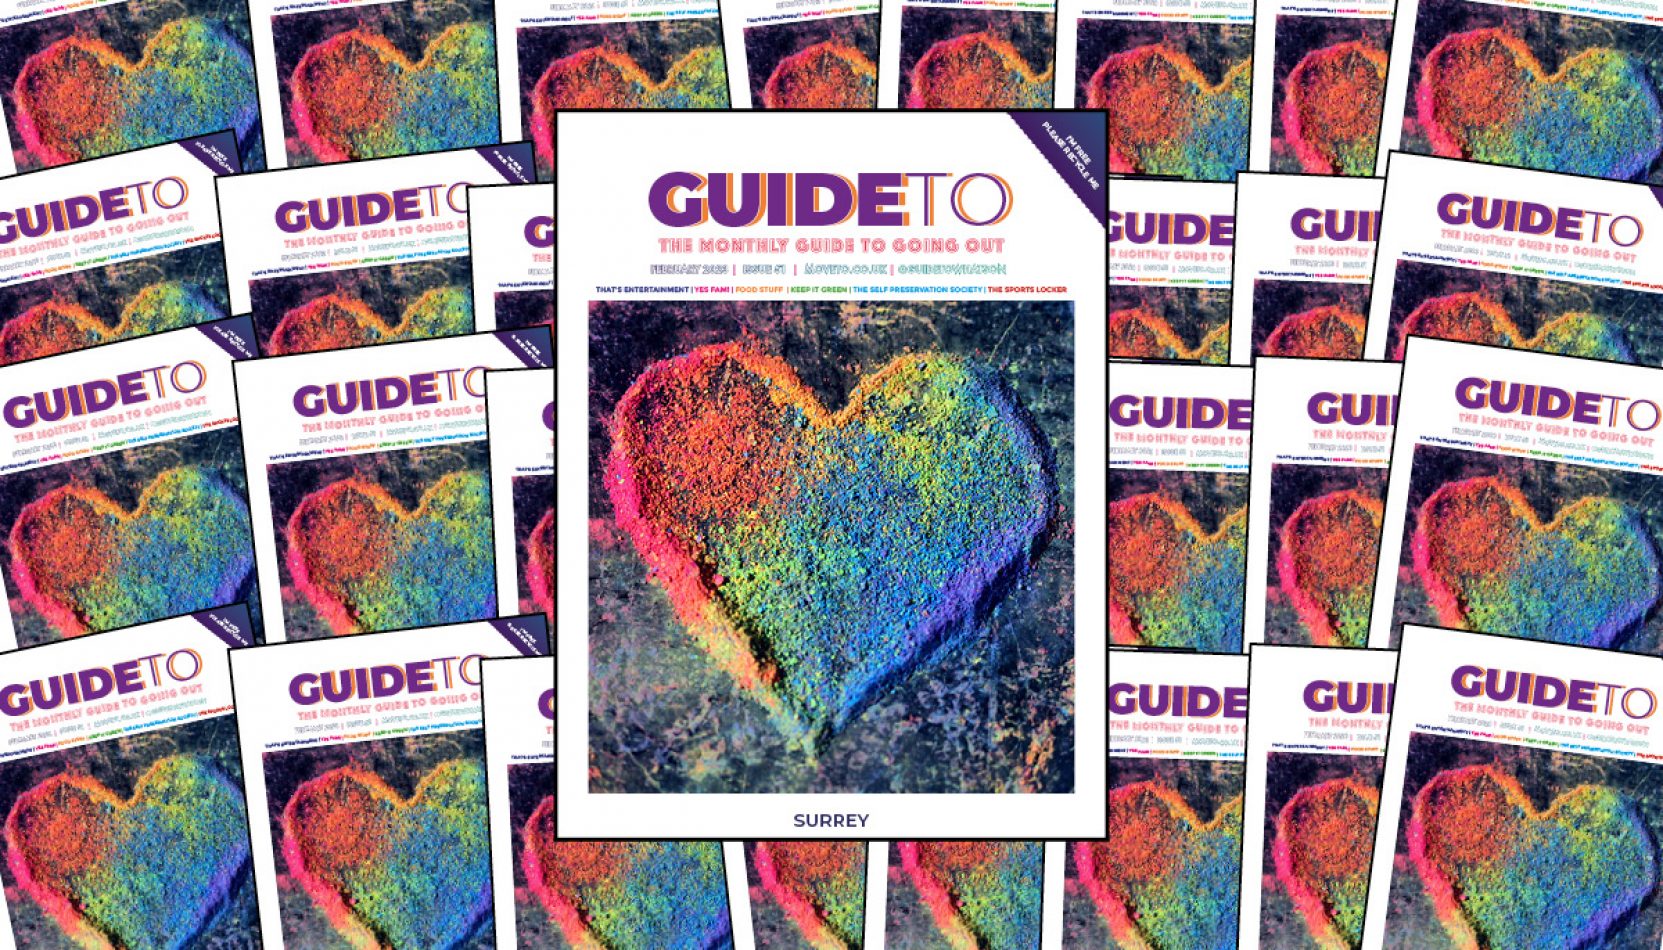 GuideTo Surrey, front covers, newspaper, magazine, february 2023, guide to surrey, guide to guildford, guide to woking, guide to farnham, guide to Kingston, guide to elmbridge, out now, read online, marketing, advertising,